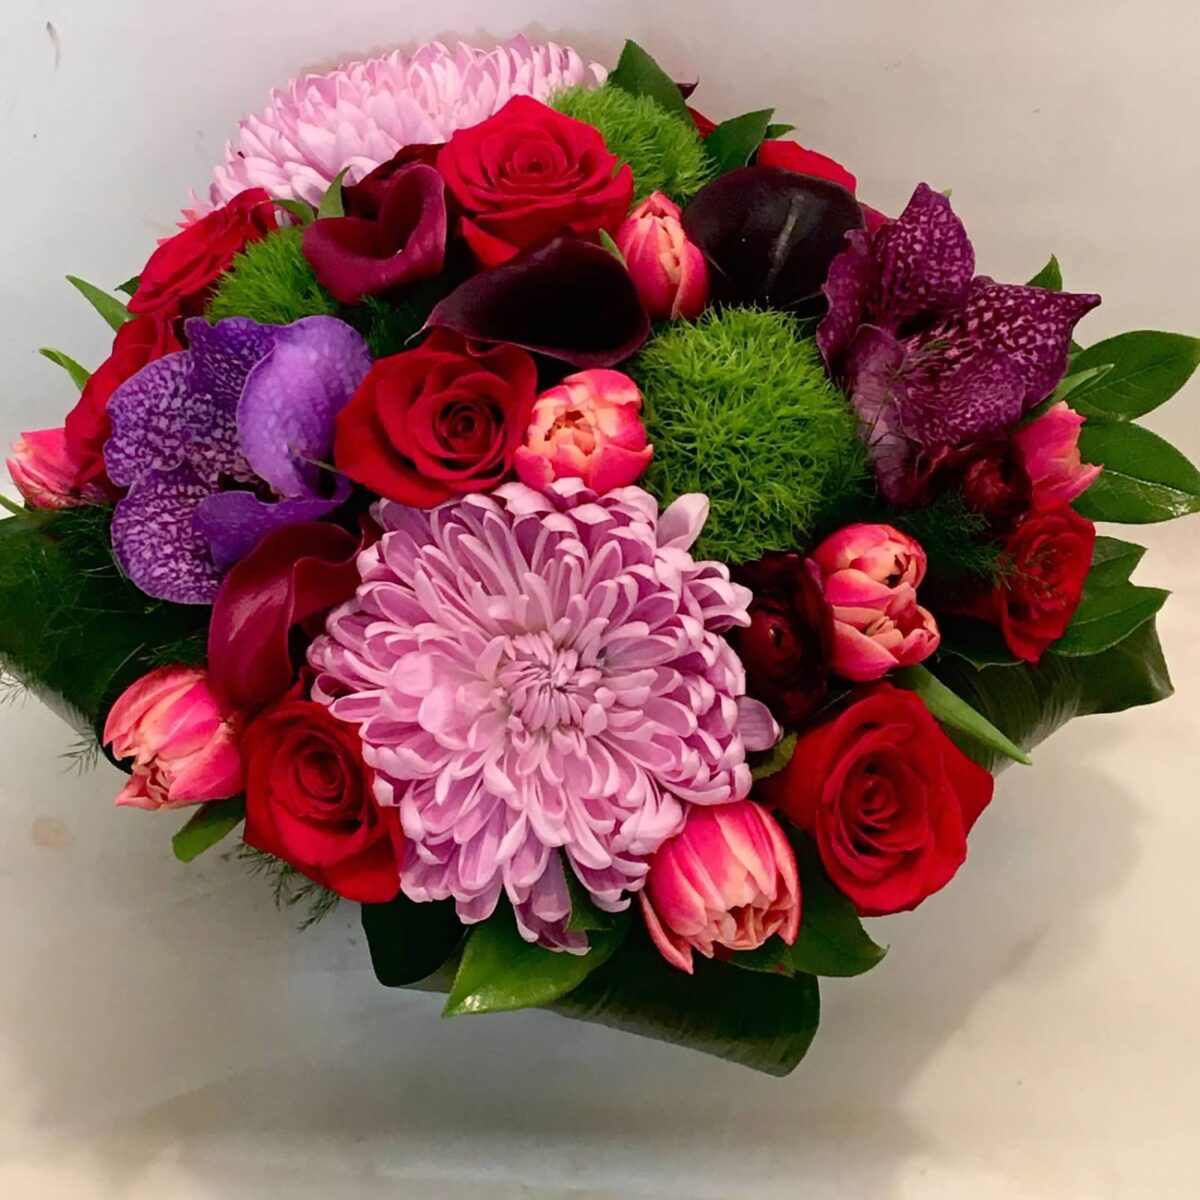 concierge-flowers-delivery-nyc-162